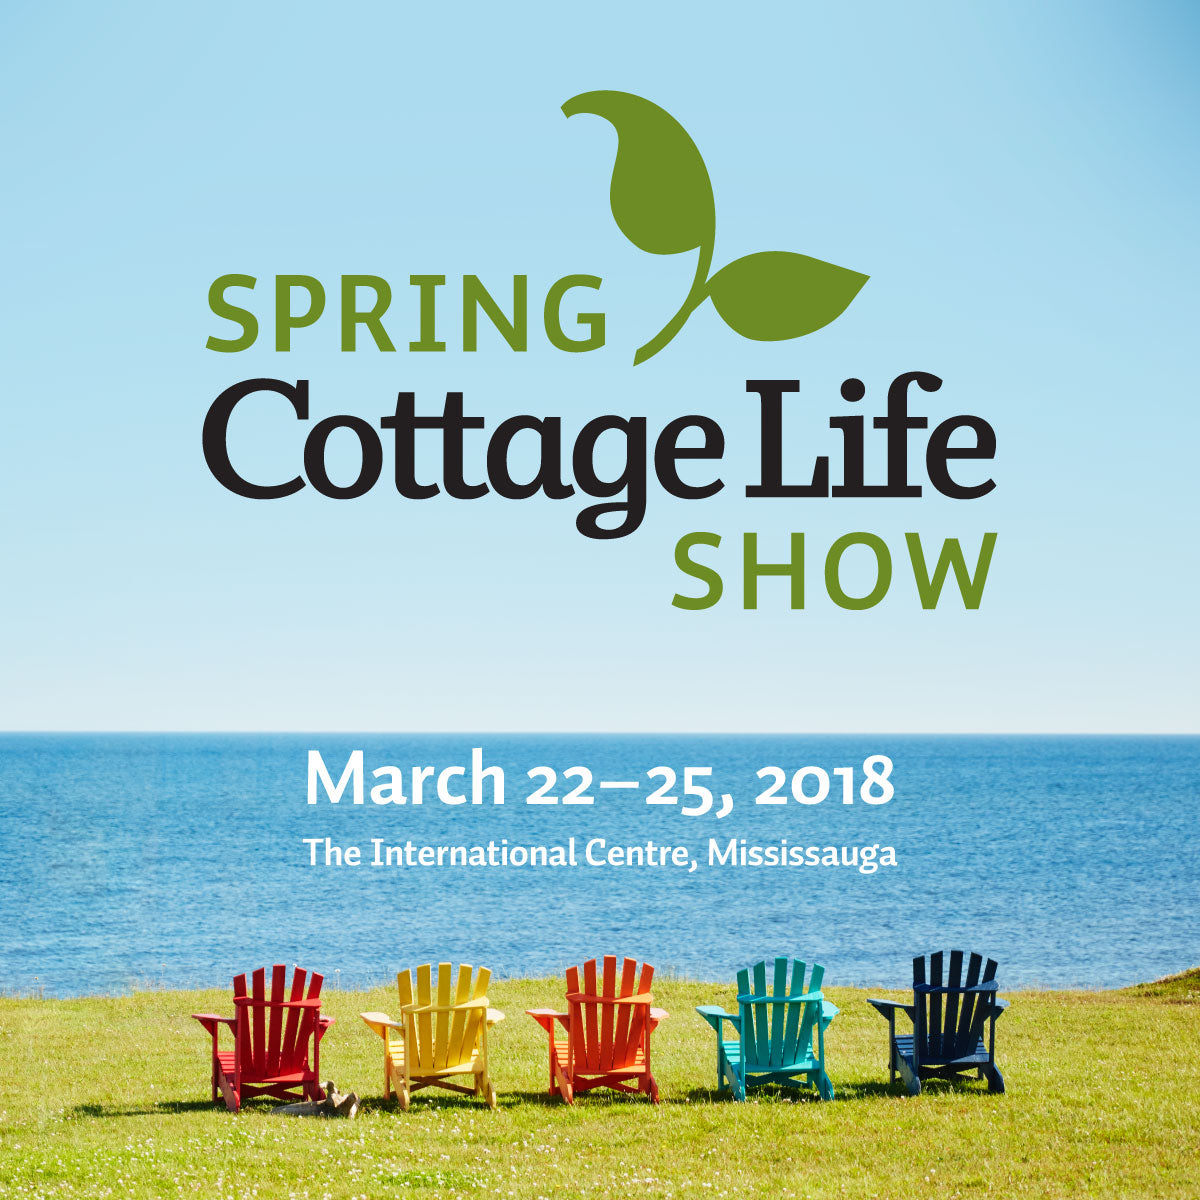 Toronto Cottage Life Show 2018 Water Treatment for Your Family